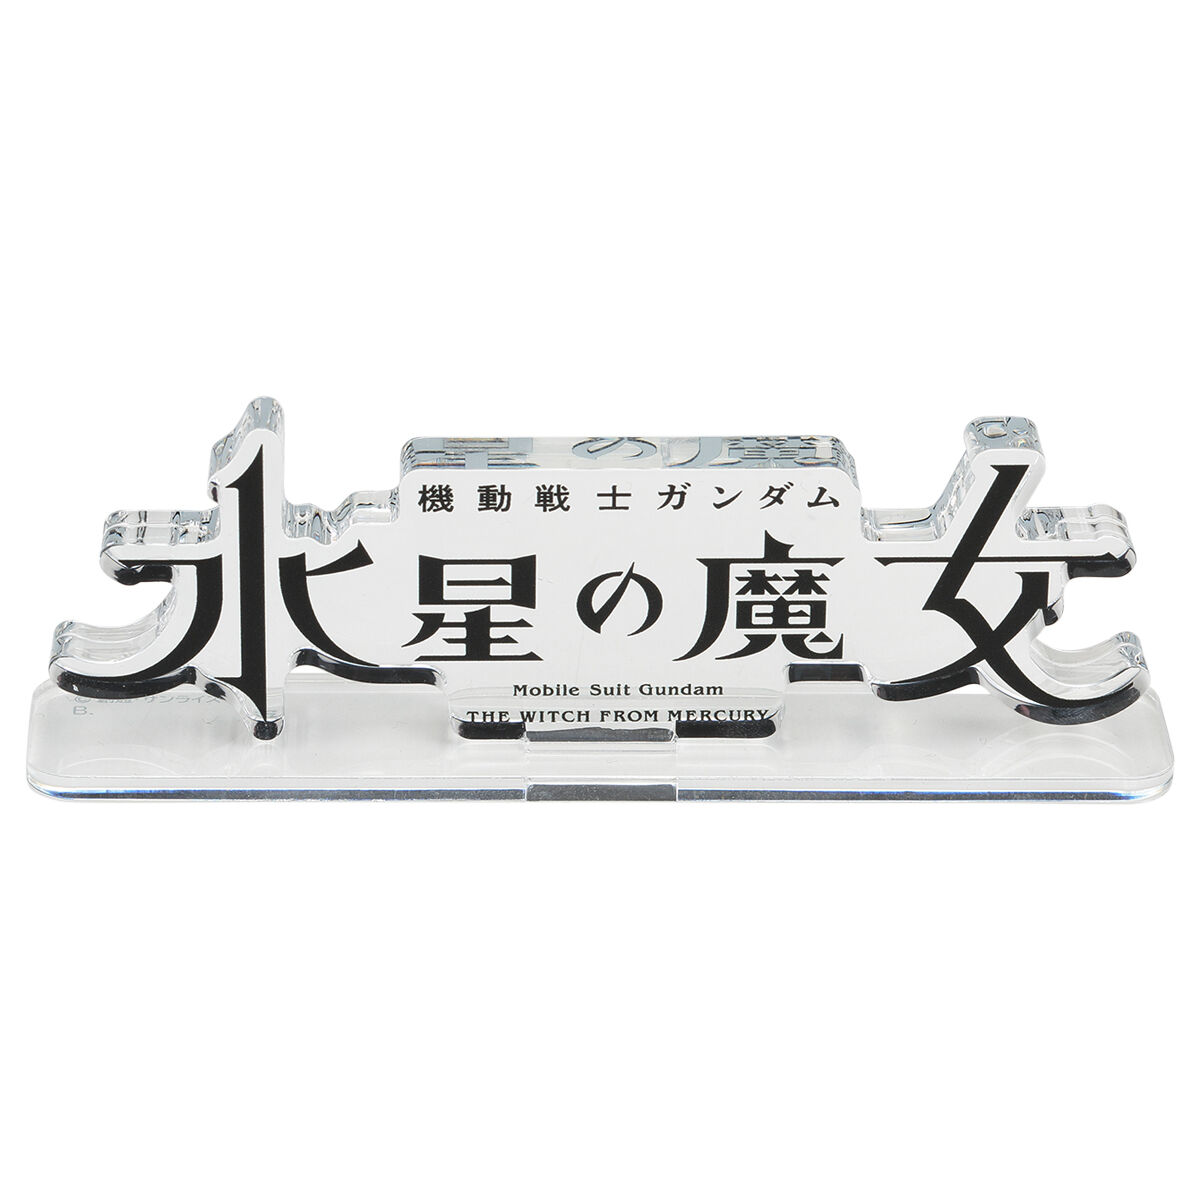 Acrylic Logo Diplay EX-Mobile Suit Gundam : The Witch From Mercury